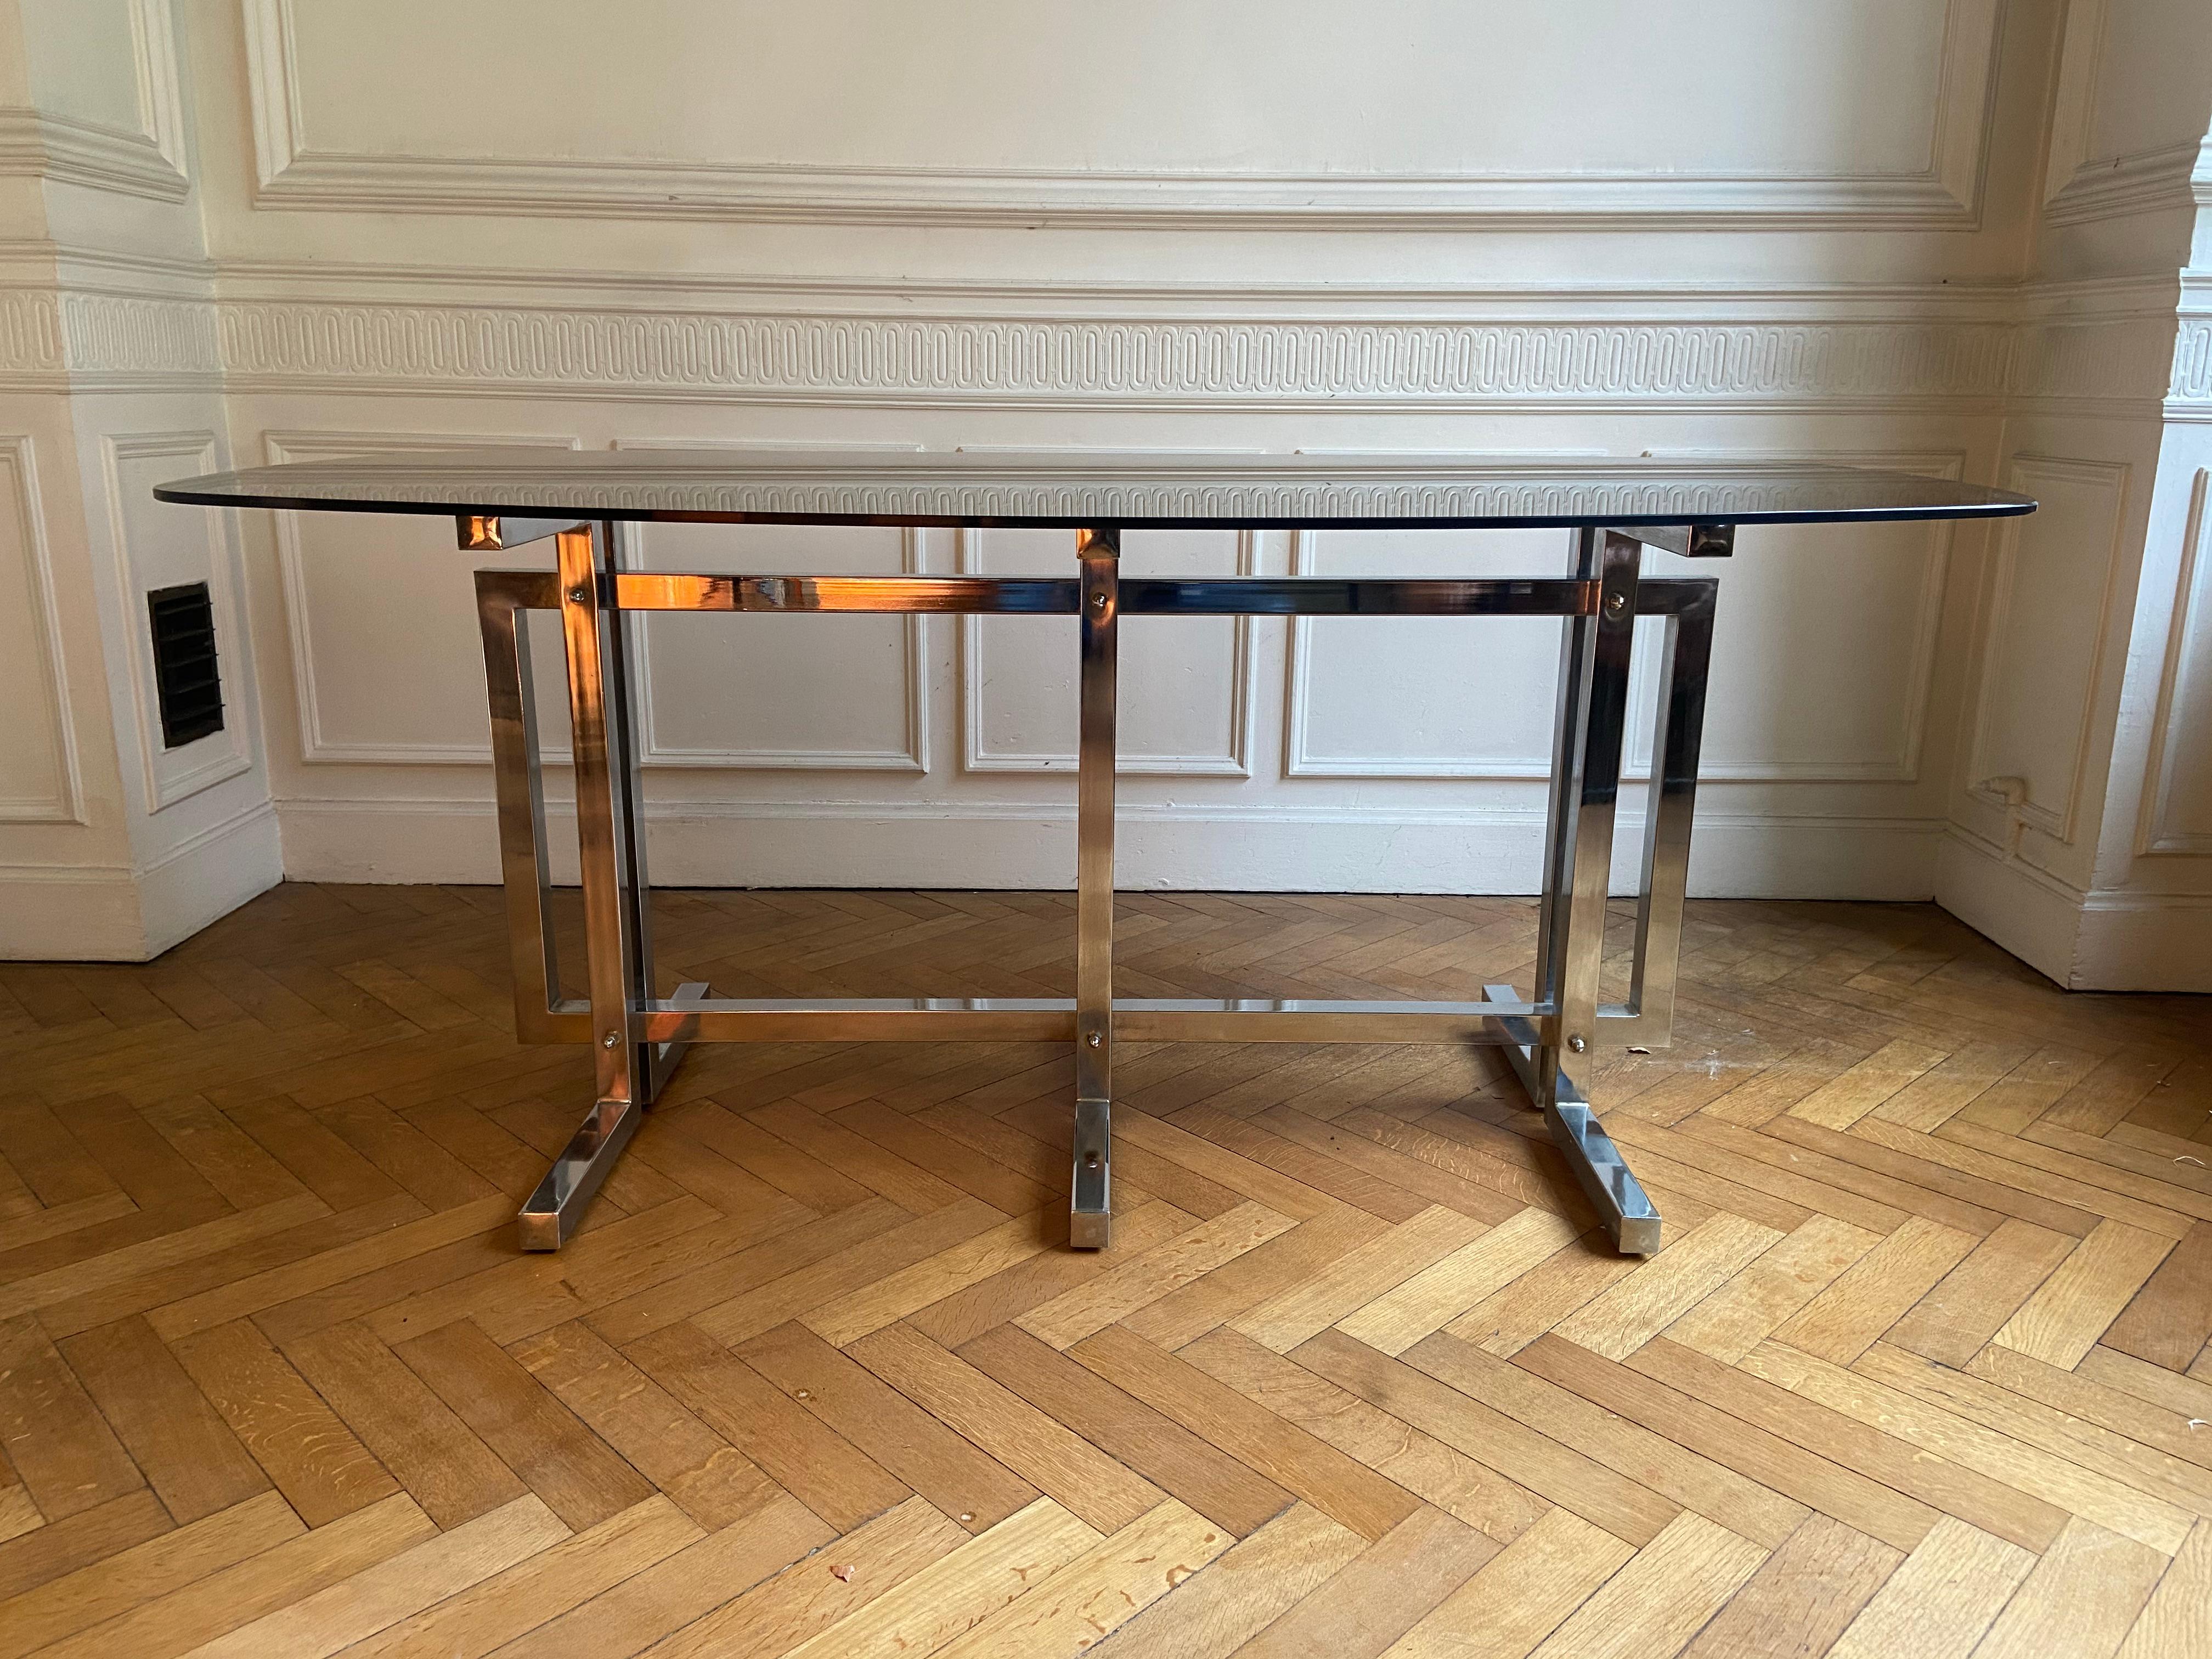 Vintage dining table. Graphic feet in chrome metal. Smoked glass top. State of use consistent with age